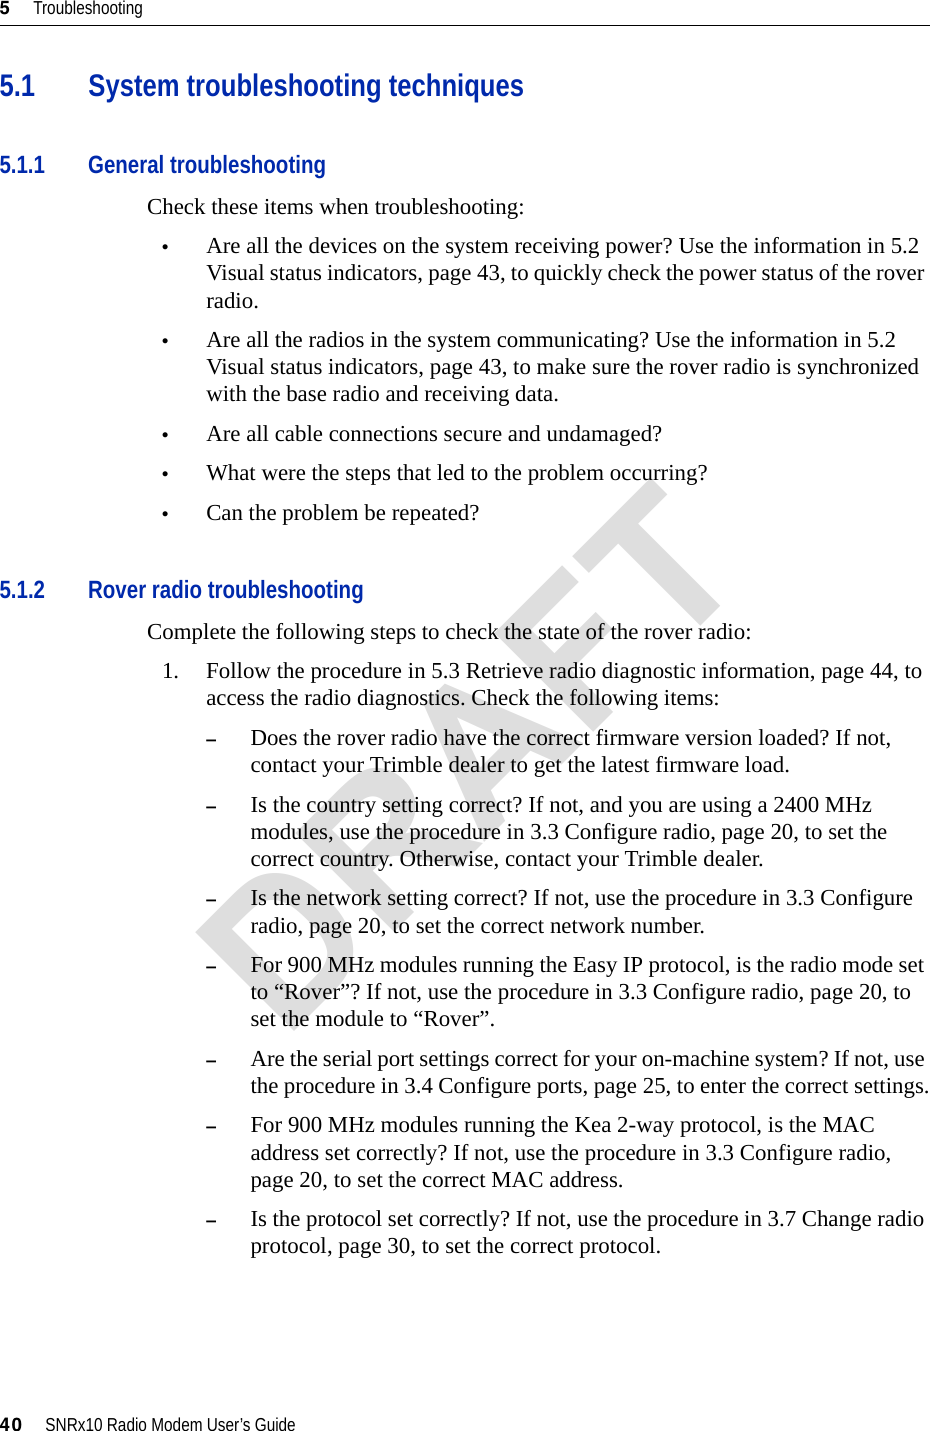 5     Troubleshooting40     SNRx10 Radio Modem User’s Guide5.1 System troubleshooting techniques5.1.1 General troubleshootingCheck these items when troubleshooting:•Are all the devices on the system receiving power? Use the information in 5.2 Visual status indicators, page 43, to quickly check the power status of the rover radio.•Are all the radios in the system communicating? Use the information in 5.2 Visual status indicators, page 43, to make sure the rover radio is synchronized with the base radio and receiving data.•Are all cable connections secure and undamaged?•What were the steps that led to the problem occurring?•Can the problem be repeated?5.1.2 Rover radio troubleshootingComplete the following steps to check the state of the rover radio:1. Follow the procedure in 5.3 Retrieve radio diagnostic information, page 44, to access the radio diagnostics. Check the following items:–Does the rover radio have the correct firmware version loaded? If not, contact your Trimble dealer to get the latest firmware load.–Is the country setting correct? If not, and you are using a 2400 MHz modules, use the procedure in 3.3 Configure radio, page 20, to set the correct country. Otherwise, contact your Trimble dealer.–Is the network setting correct? If not, use the procedure in 3.3 Configure radio, page 20, to set the correct network number.–For 900 MHz modules running the Easy IP protocol, is the radio mode set to “Rover”? If not, use the procedure in 3.3 Configure radio, page 20, to set the module to “Rover”.–Are the serial port settings correct for your on-machine system? If not, use the procedure in 3.4 Configure ports, page 25, to enter the correct settings.–For 900 MHz modules running the Kea 2-way protocol, is the MAC address set correctly? If not, use the procedure in 3.3 Configure radio, page 20, to set the correct MAC address.–Is the protocol set correctly? If not, use the procedure in 3.7 Change radio protocol, page 30, to set the correct protocol.DRAFT